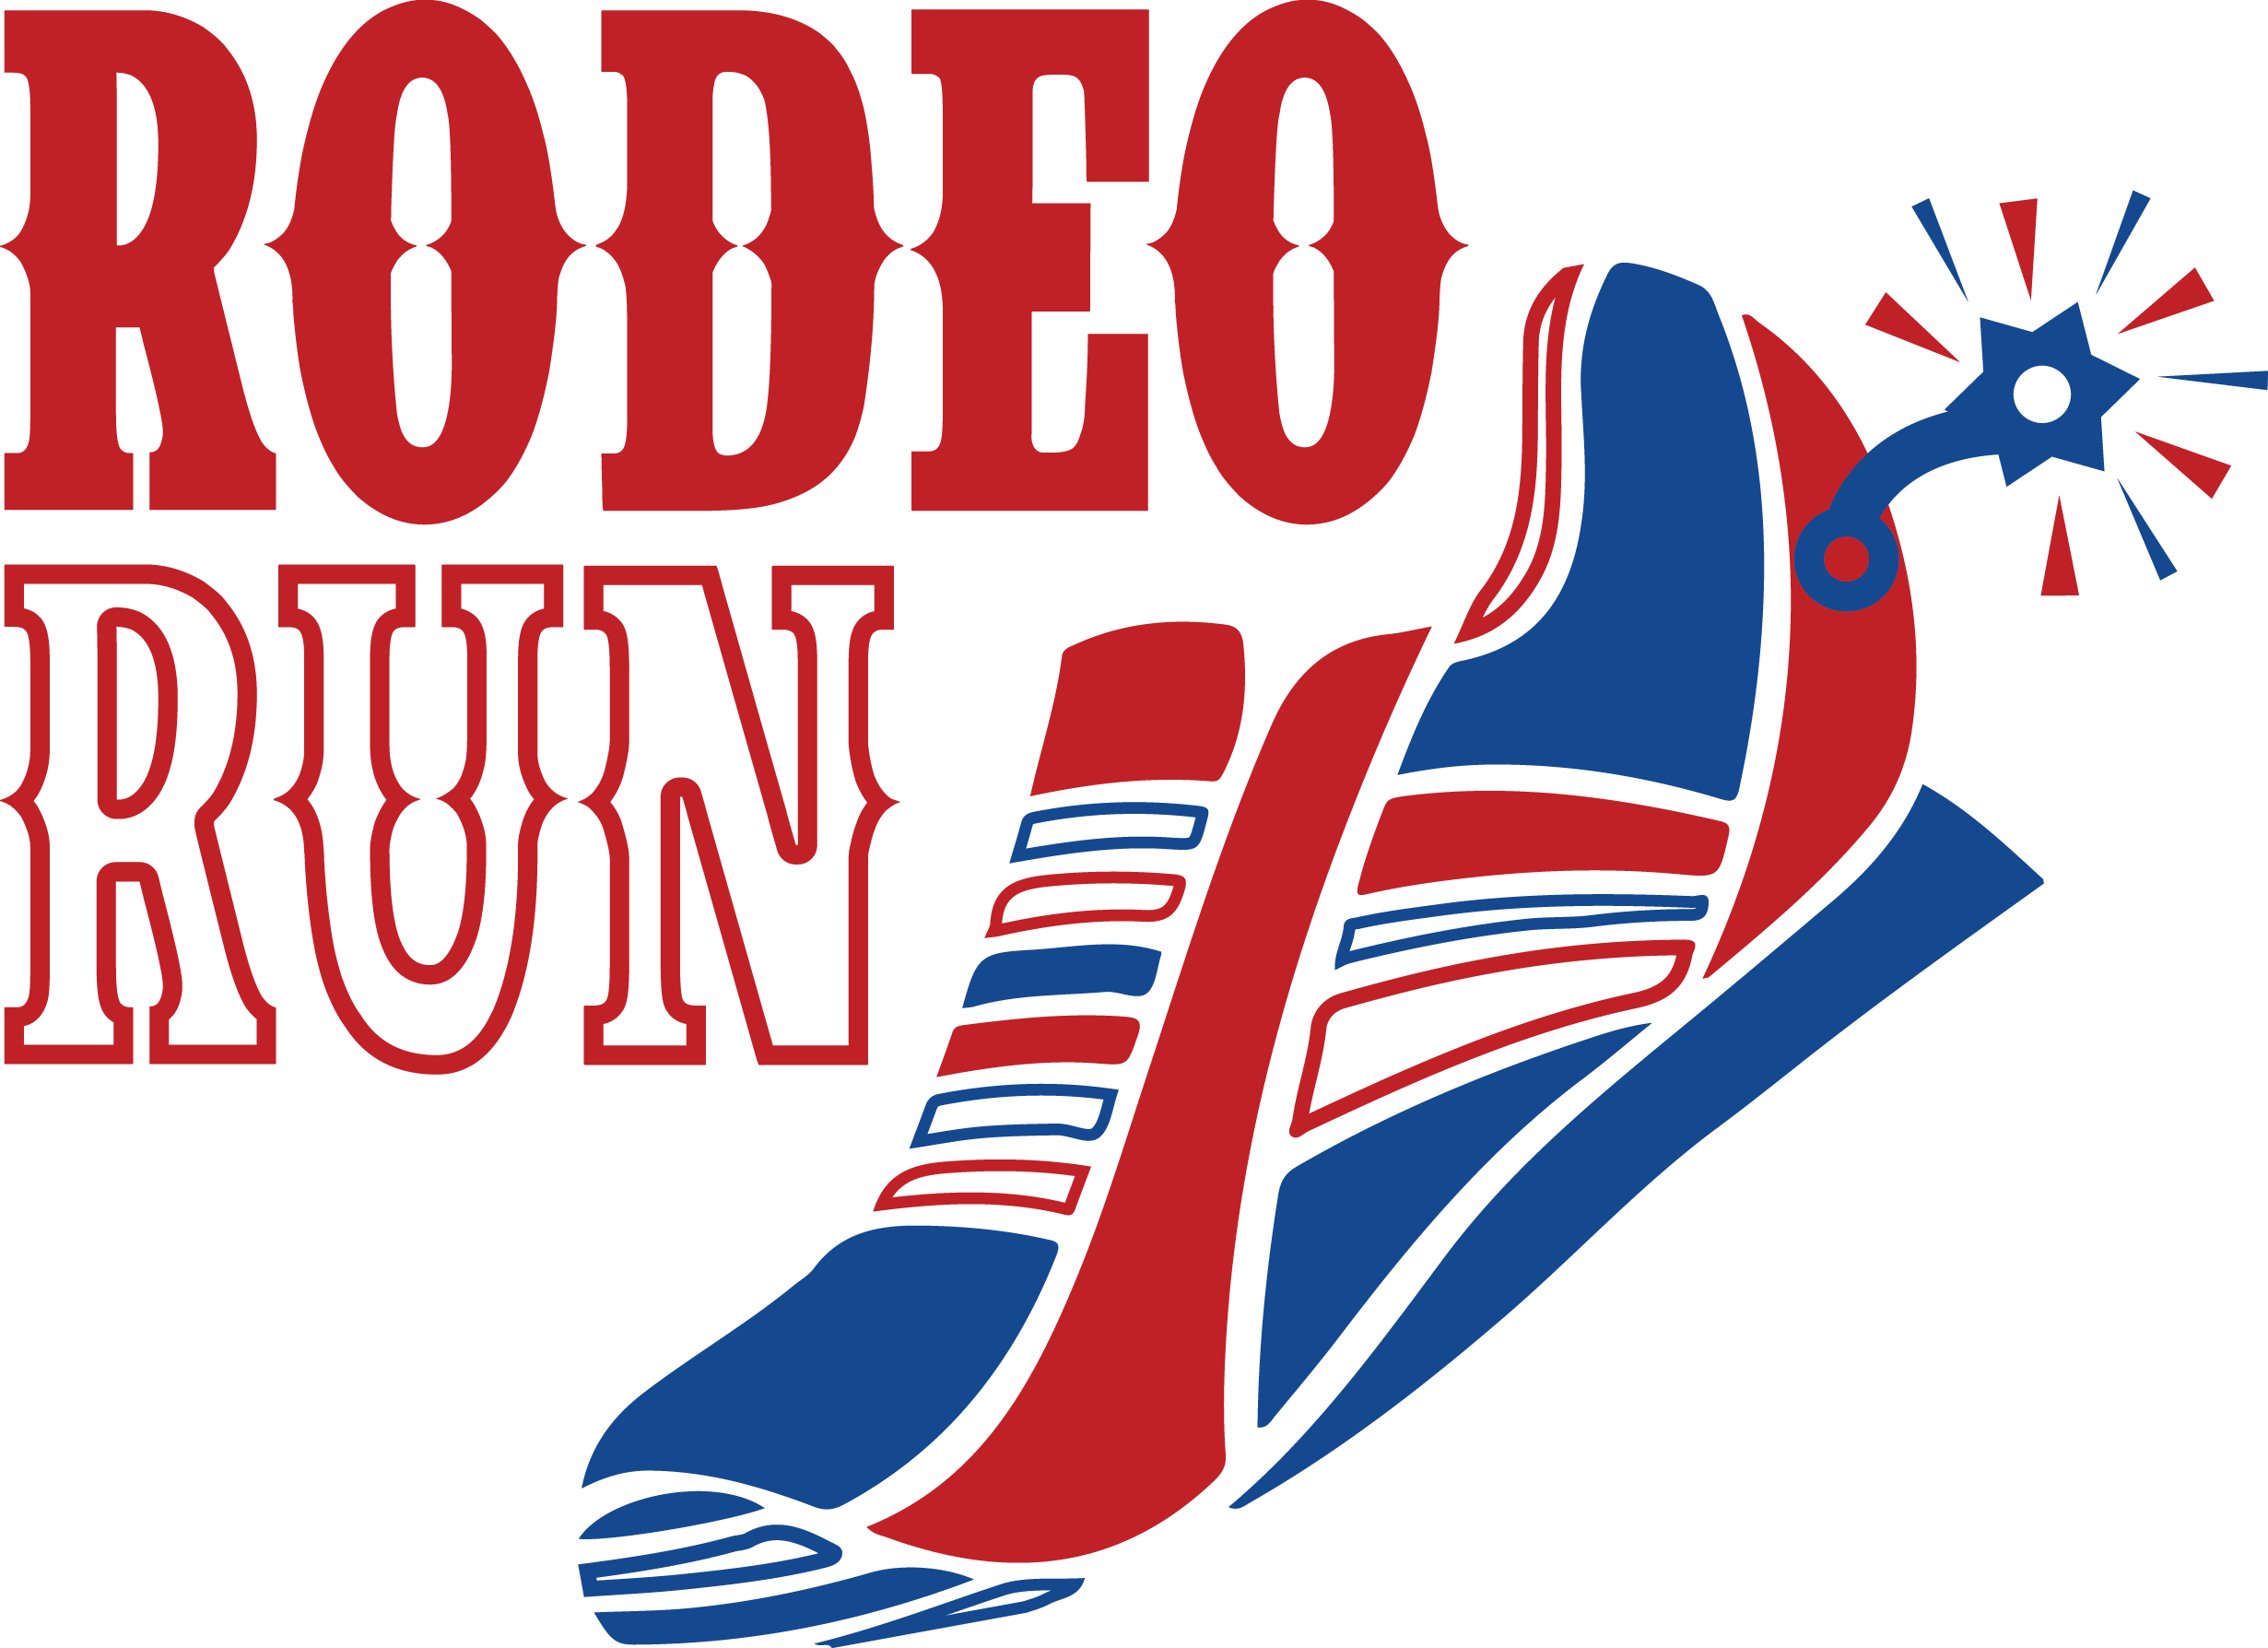 Rota-0061 Rodeo Run Logo - Chicago Bulls Coloring Pages (2461x1788)